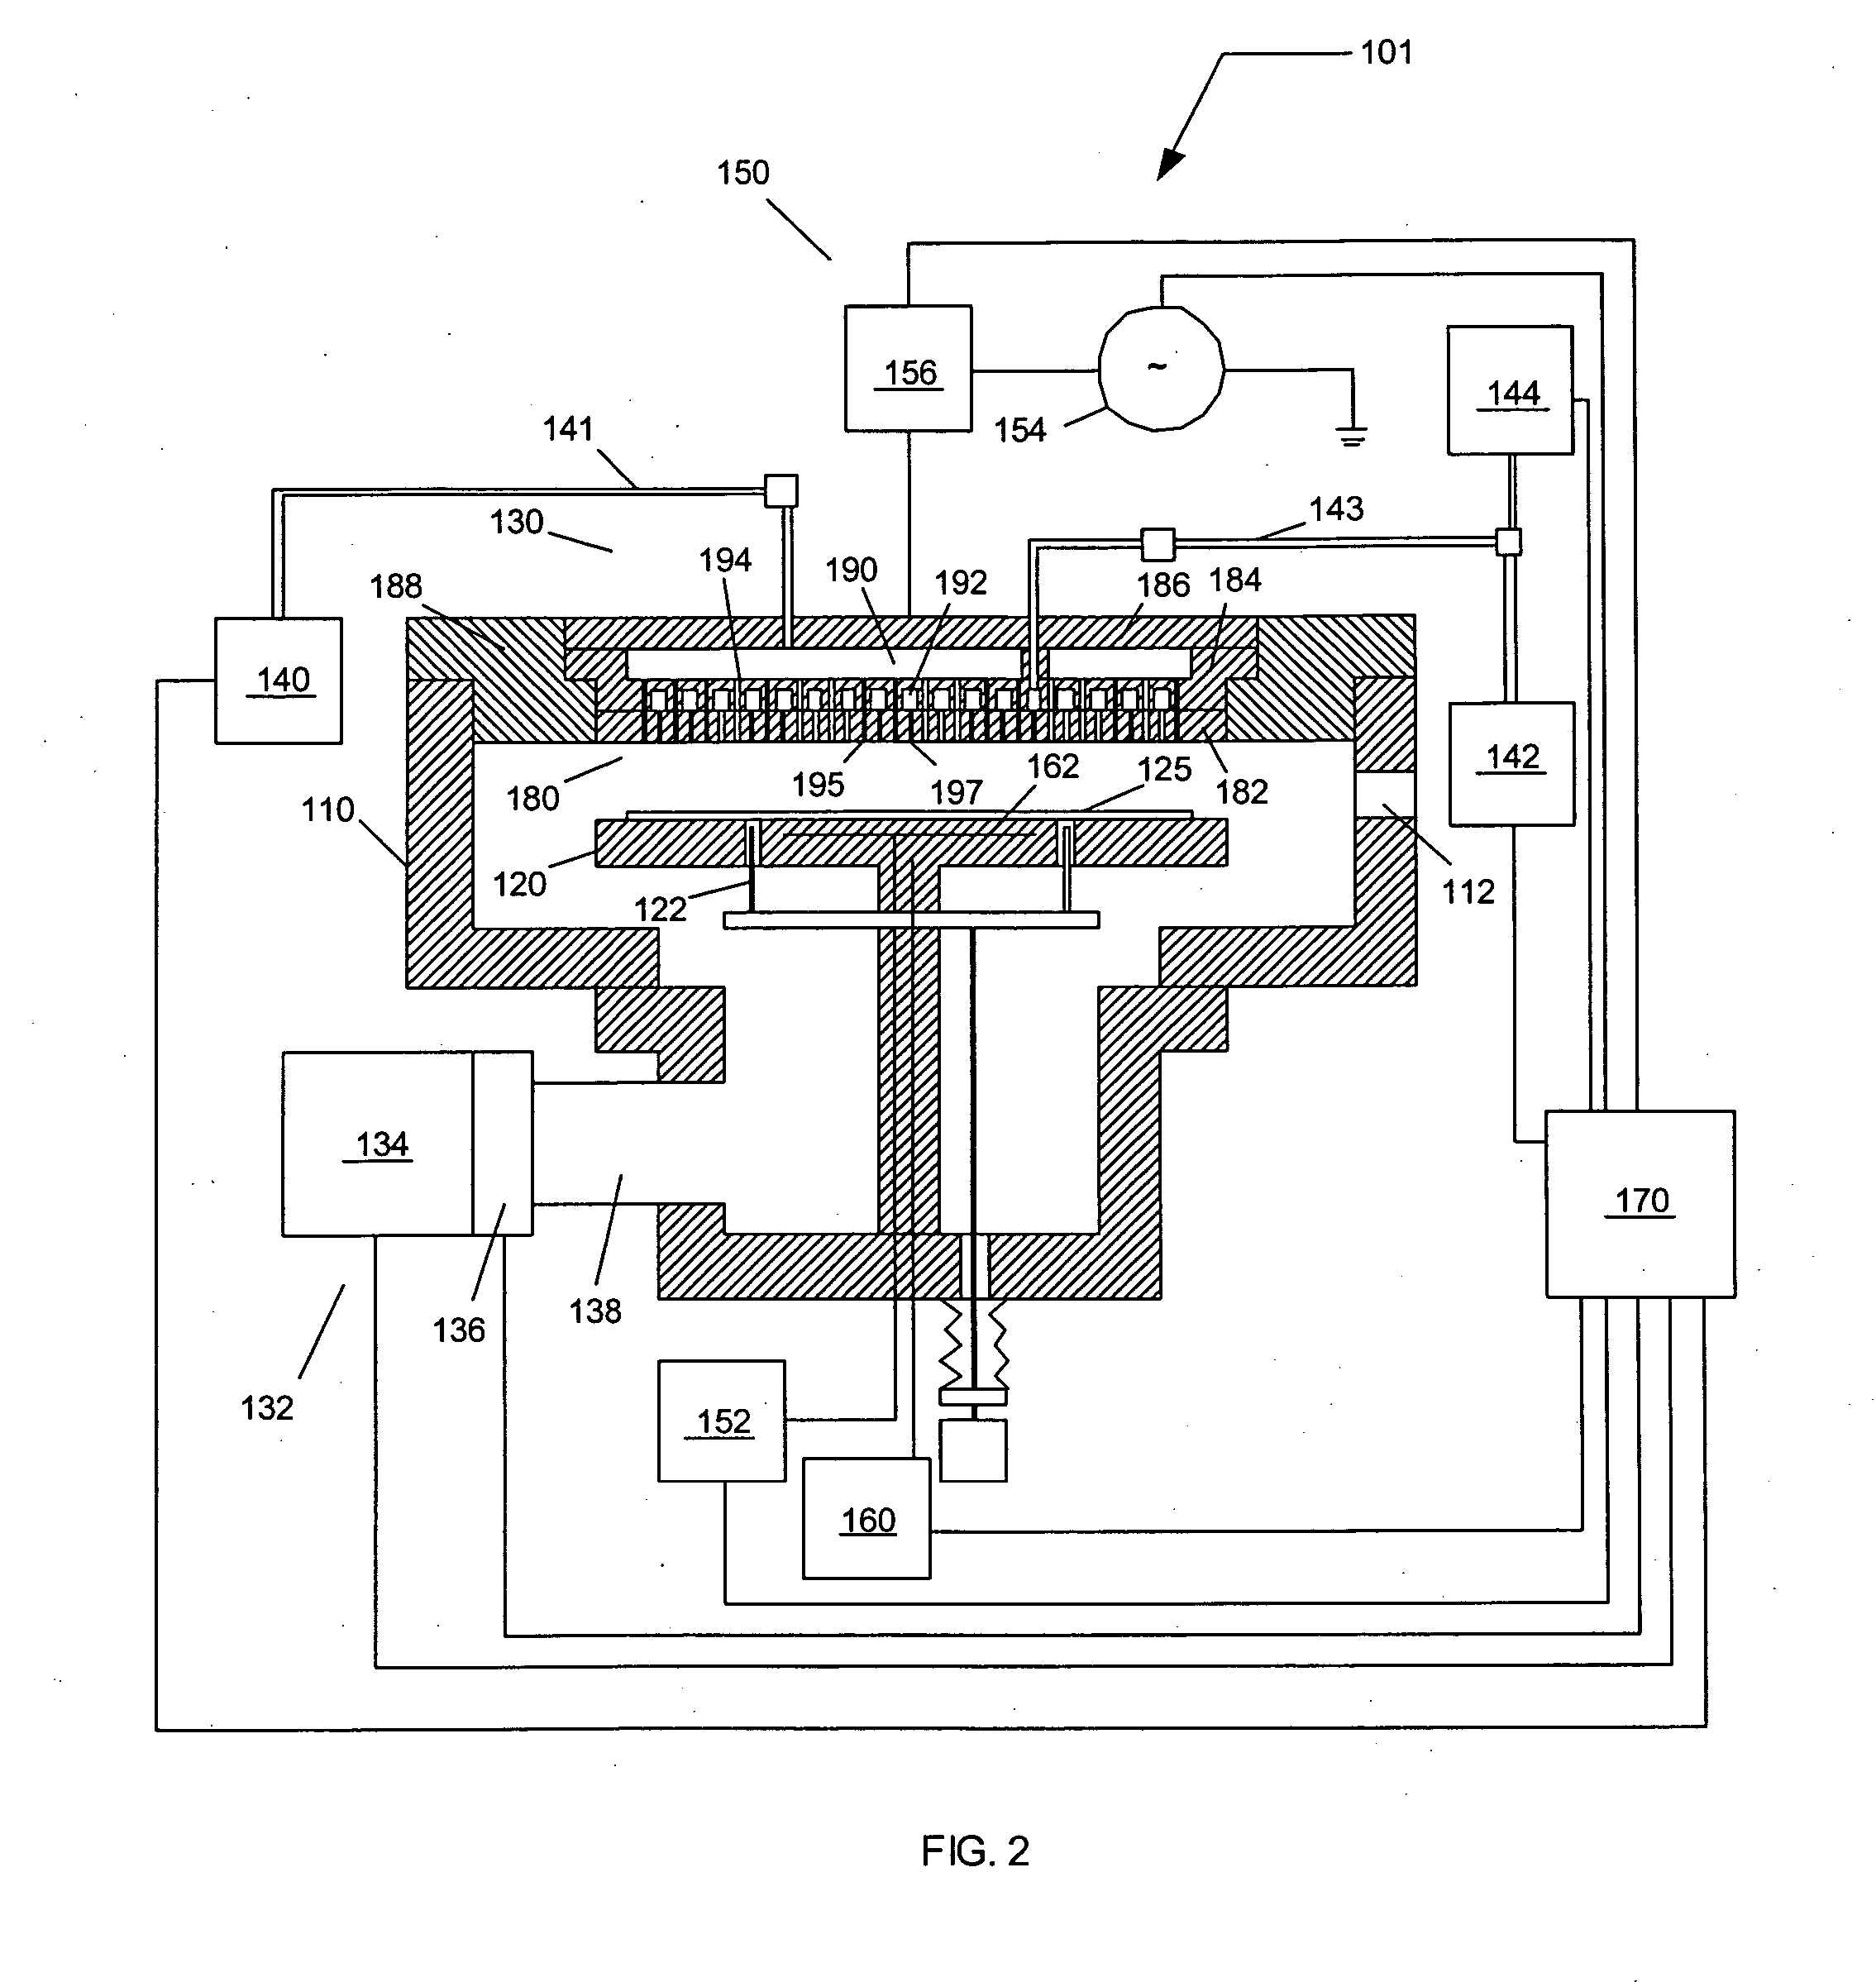 Method of plasma enhanced atomic layer deposition of TaC and TaCN films having good adhesion to copper